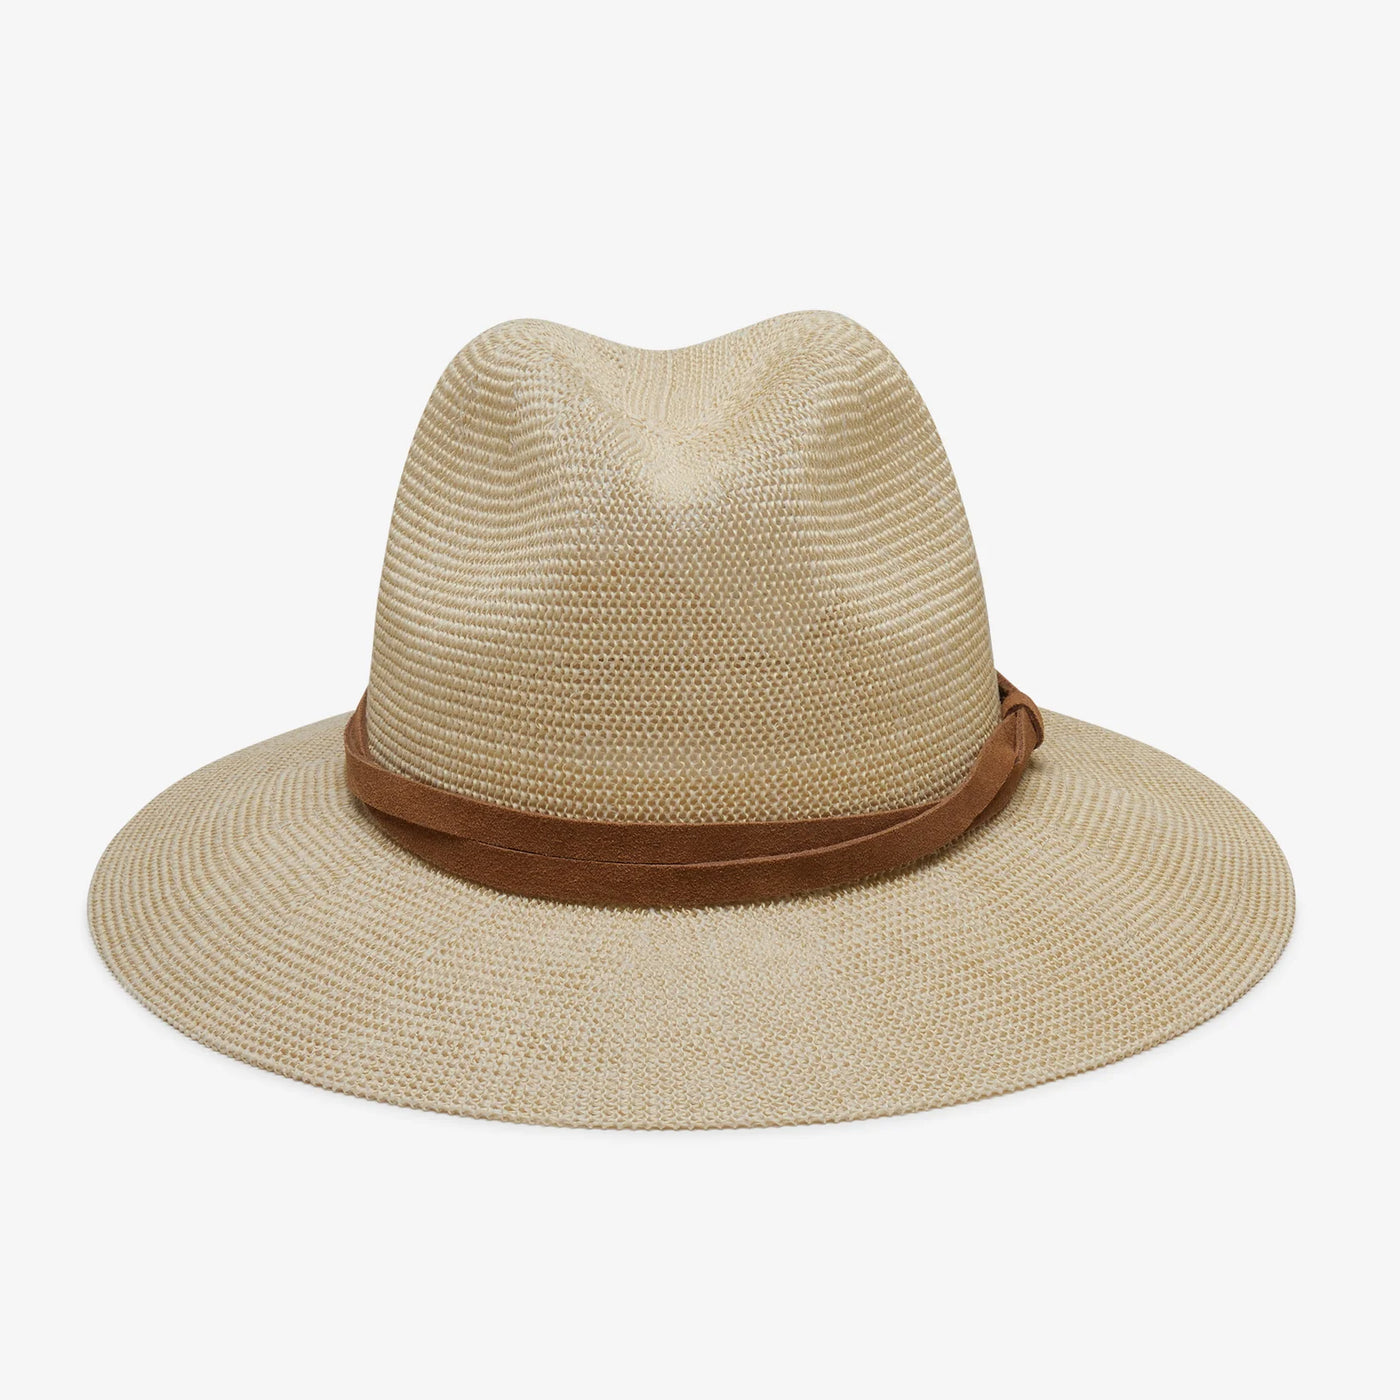 SEDONA HAT IN NATURAL - Romi Boutique